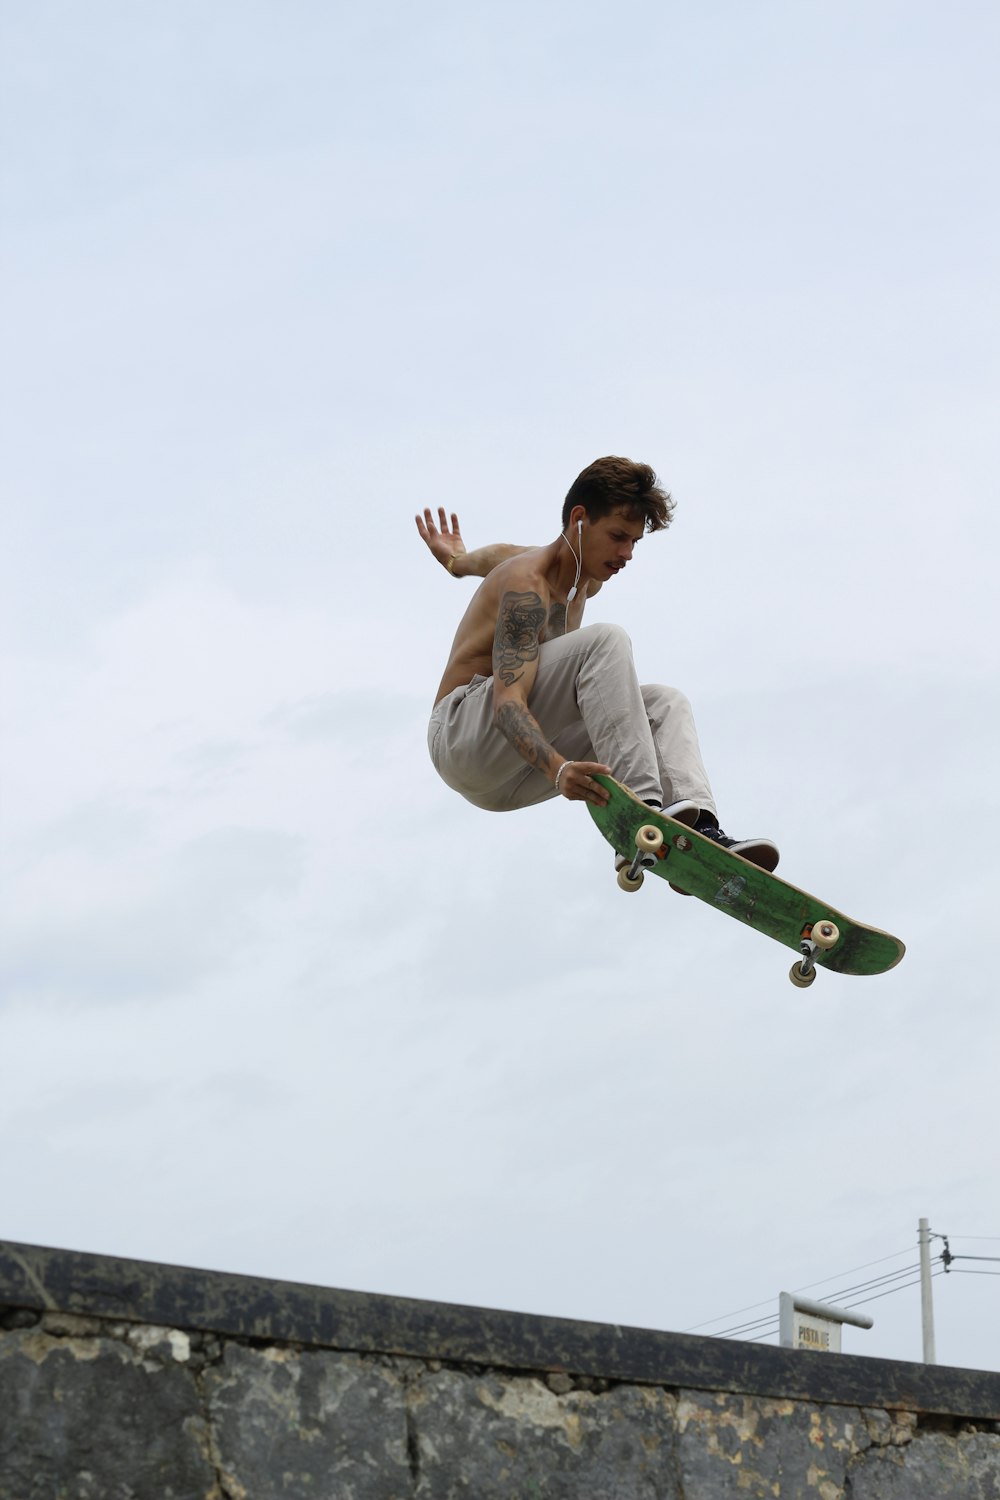 man in white tank top and green pants riding green skateboard during daytime